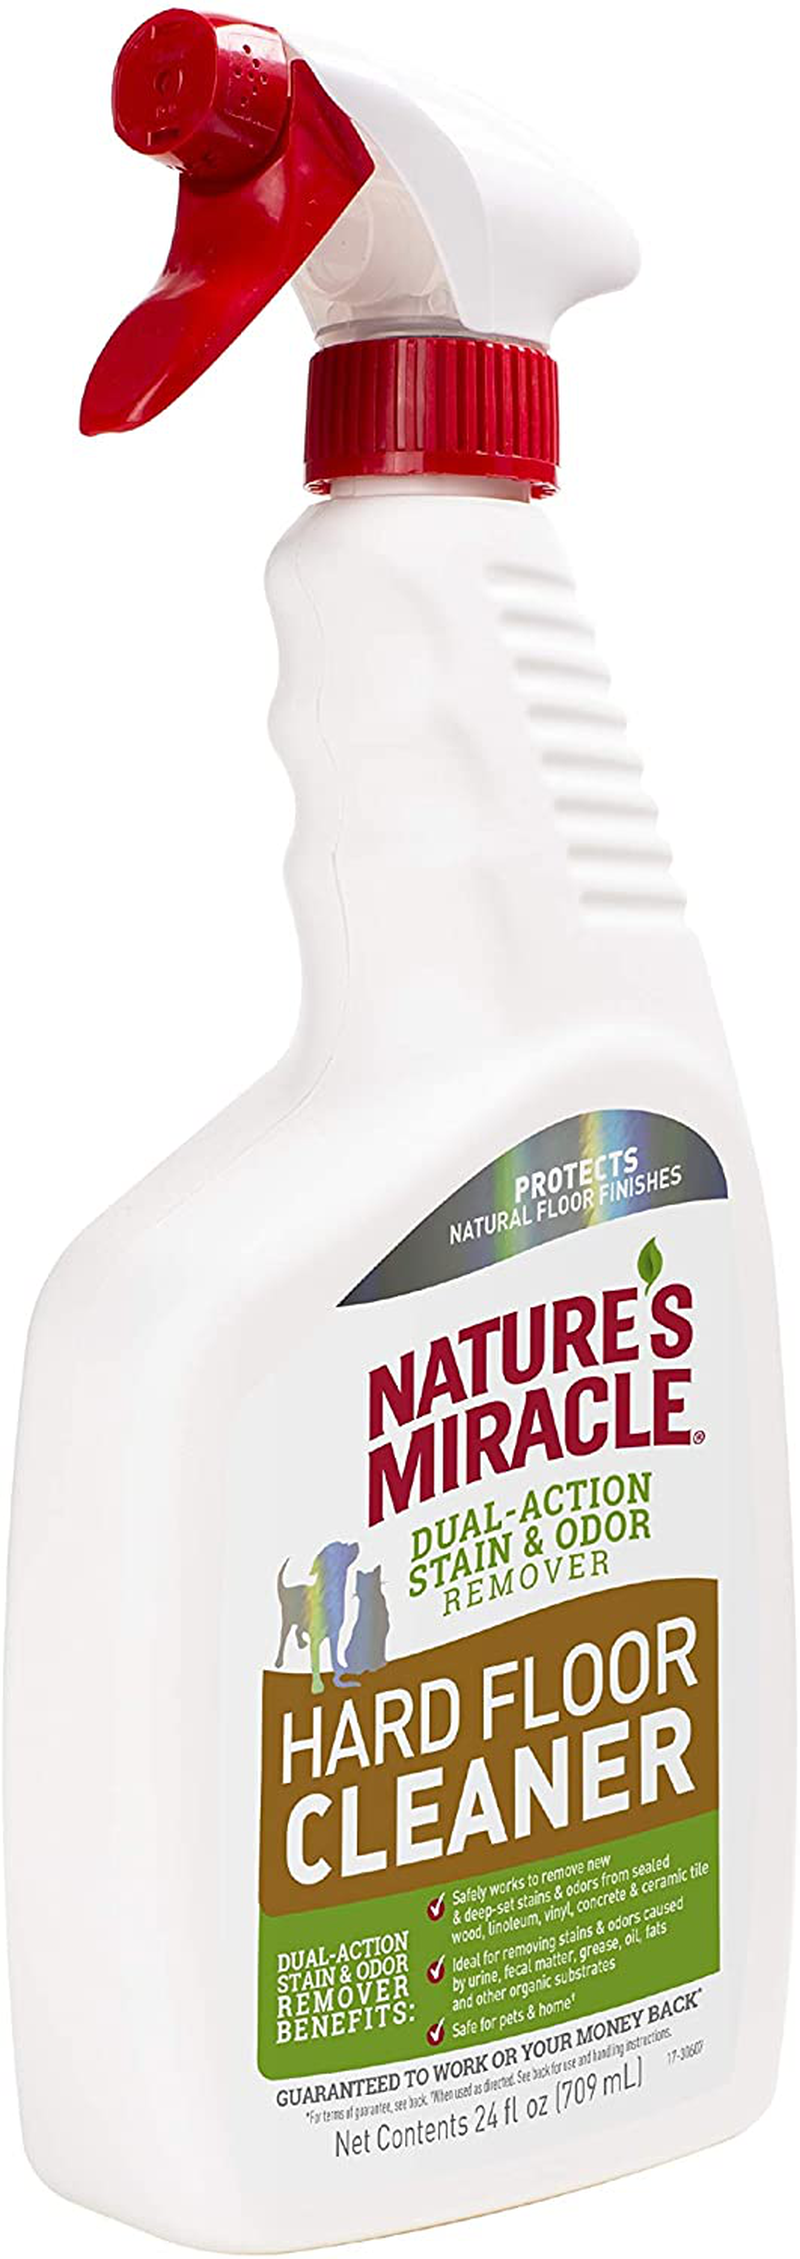 Nature’s Miracle Hard Floor Cleaner